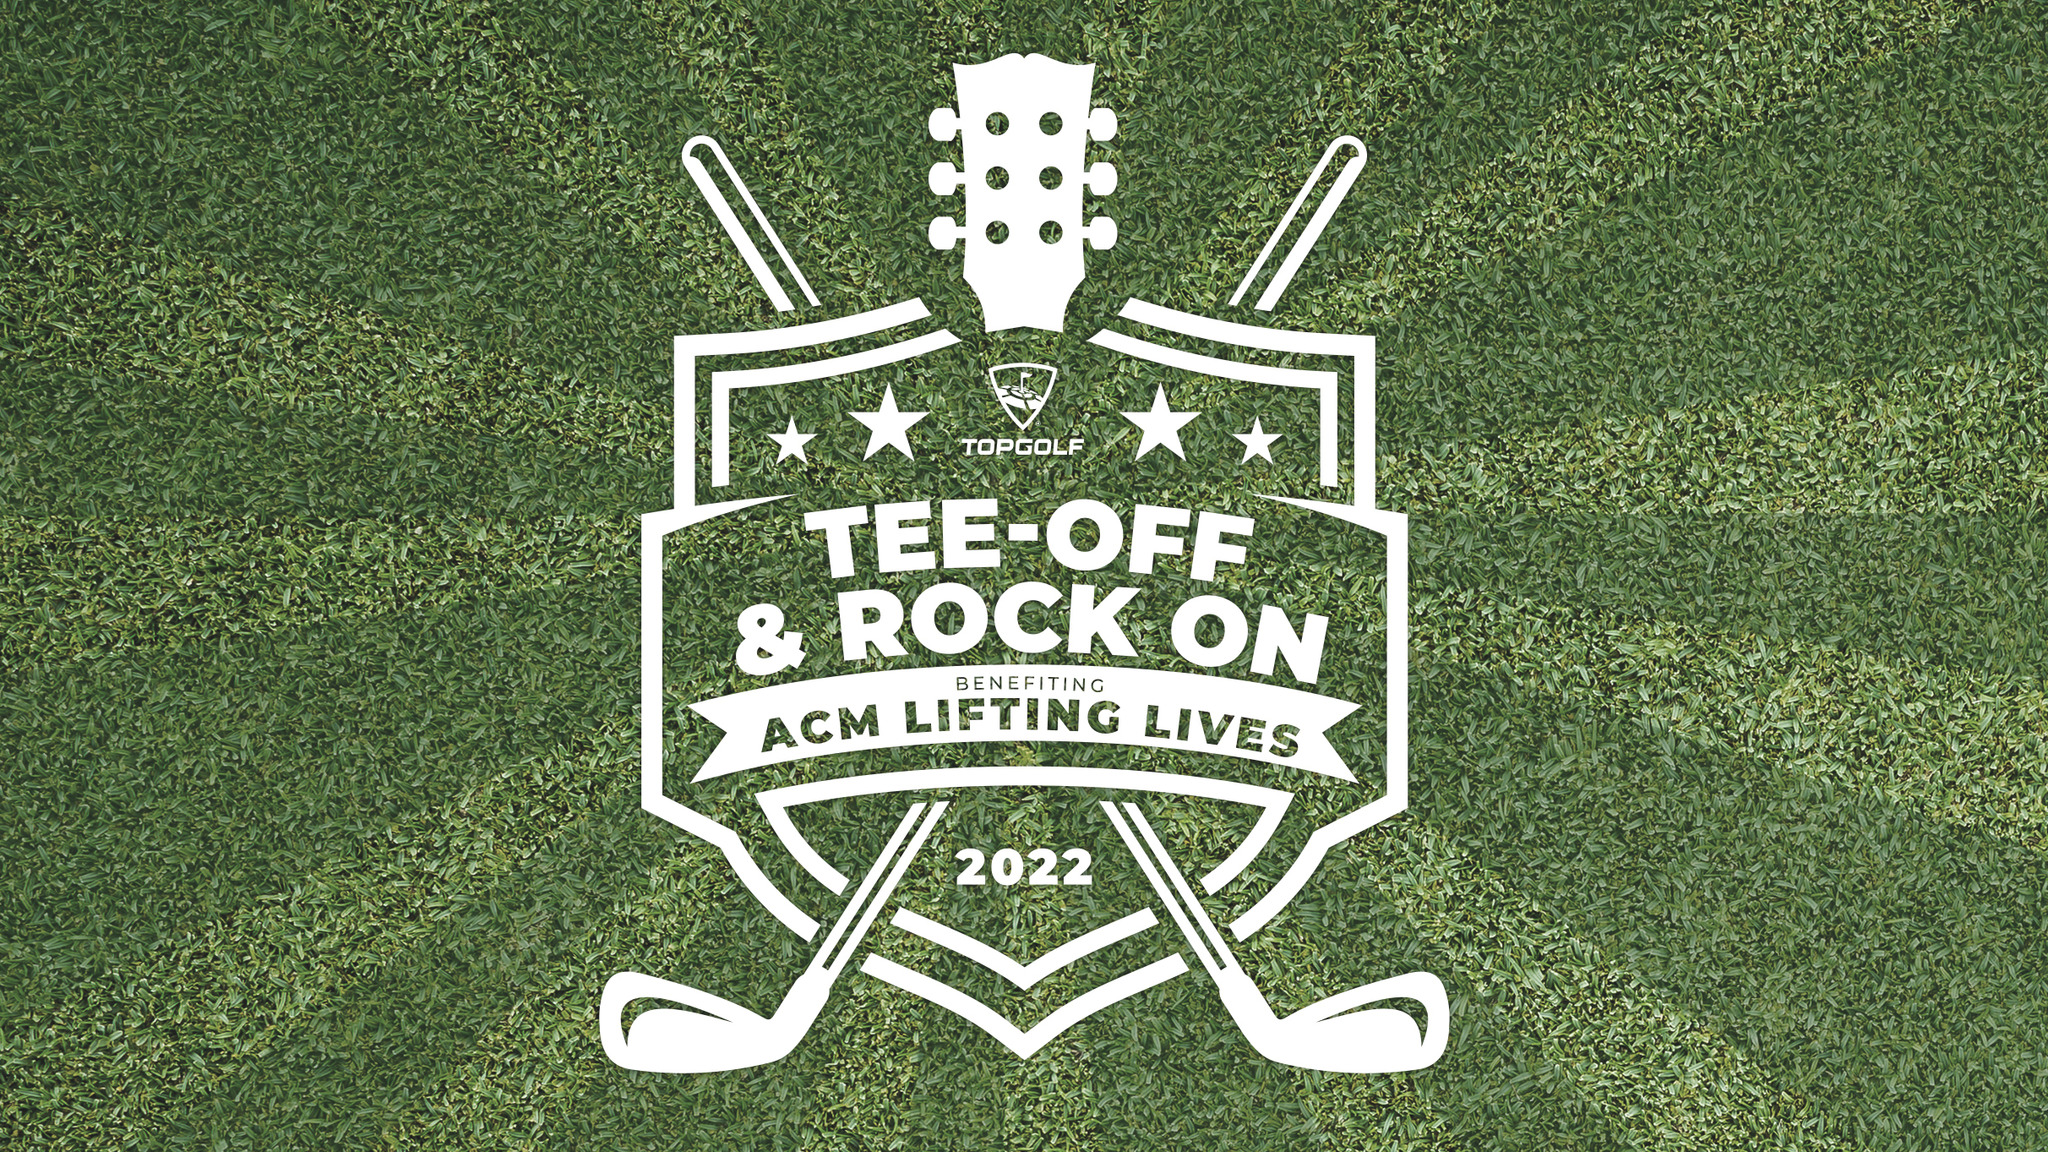 ACM Lifting Lives Tickets Event Dates & Schedule